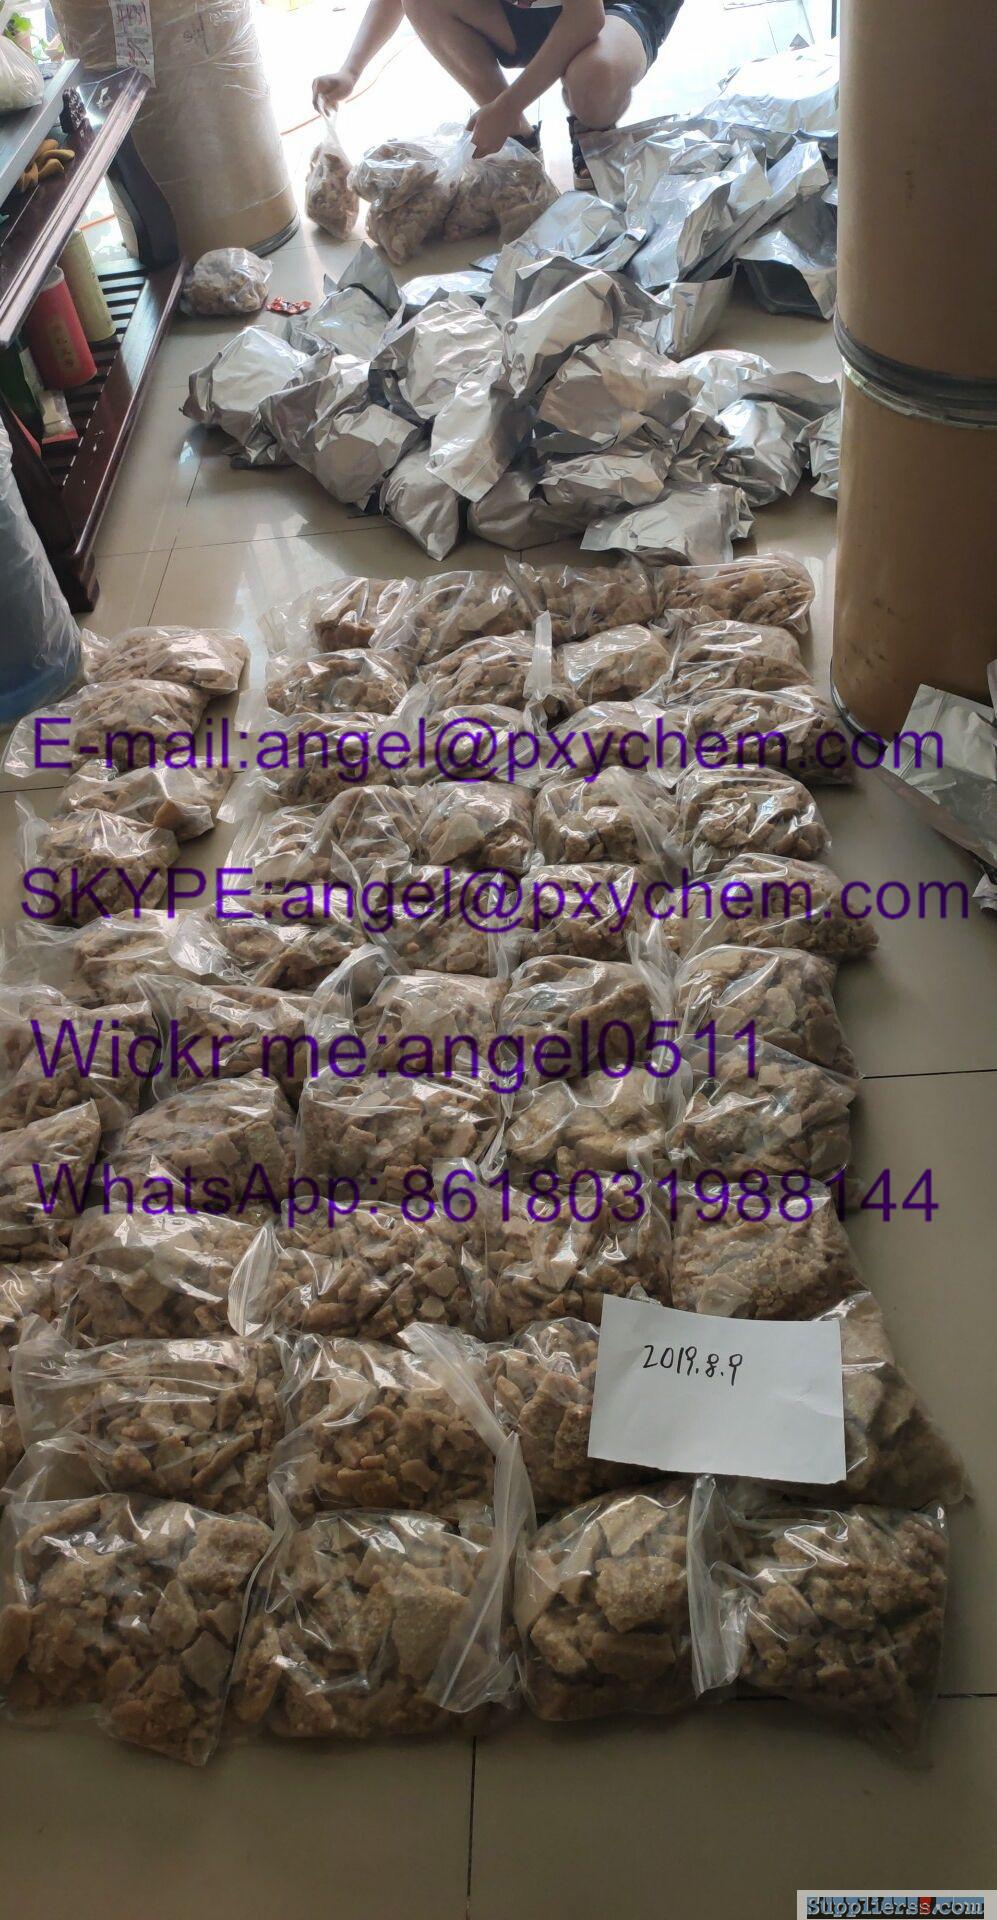 brown block crystal eutylone chemical research use(angel@pxychem.com)